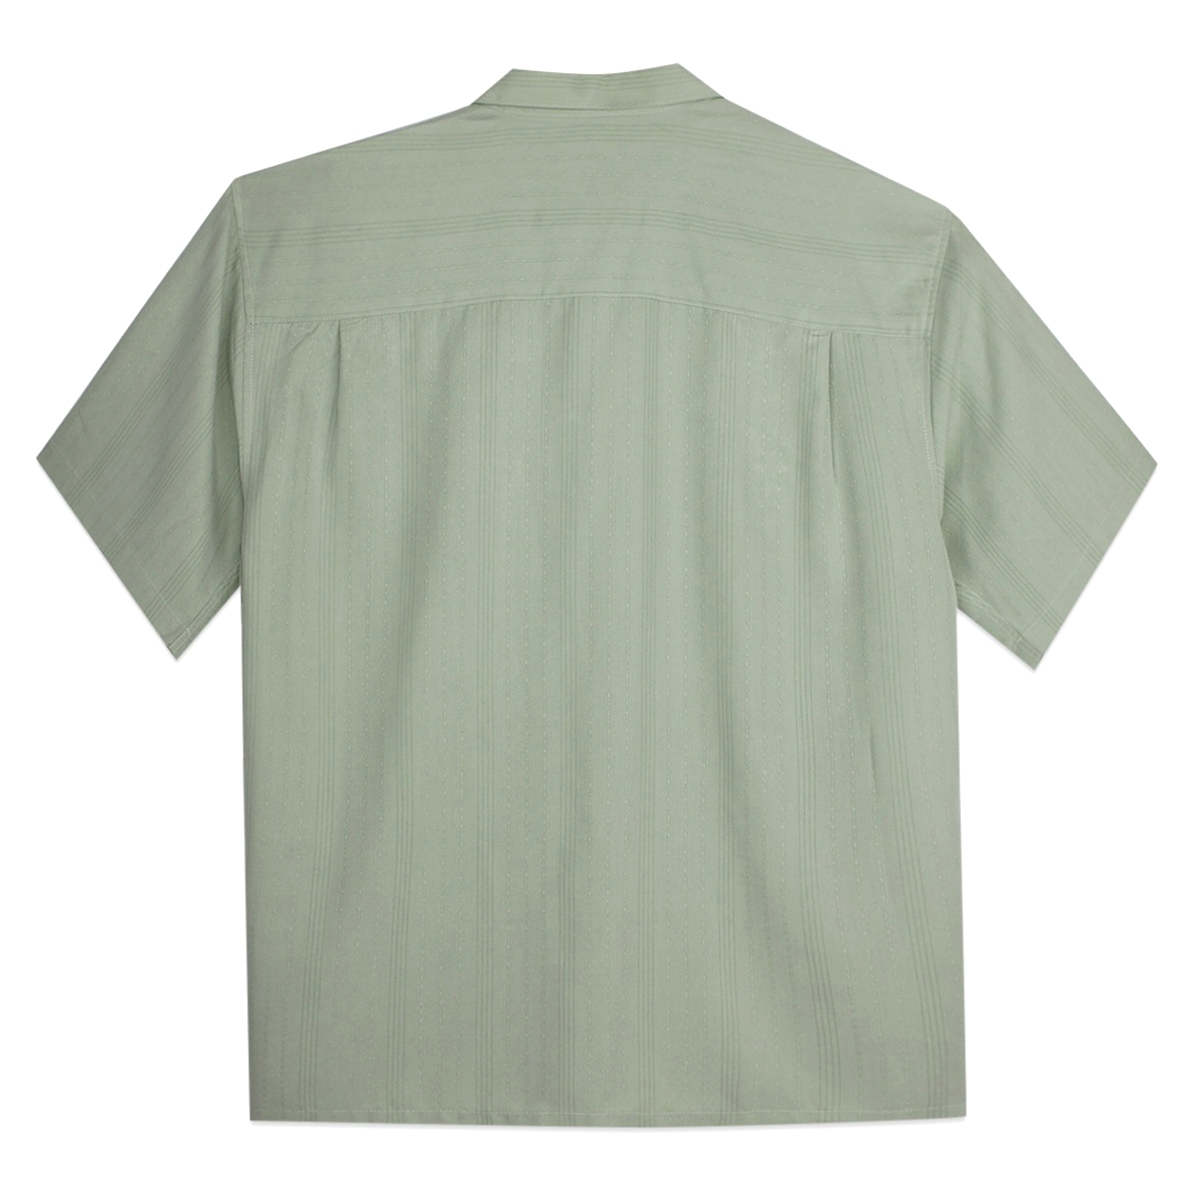 Bamboo Cay Men’s Shirt – Tranquility – Palm – back view